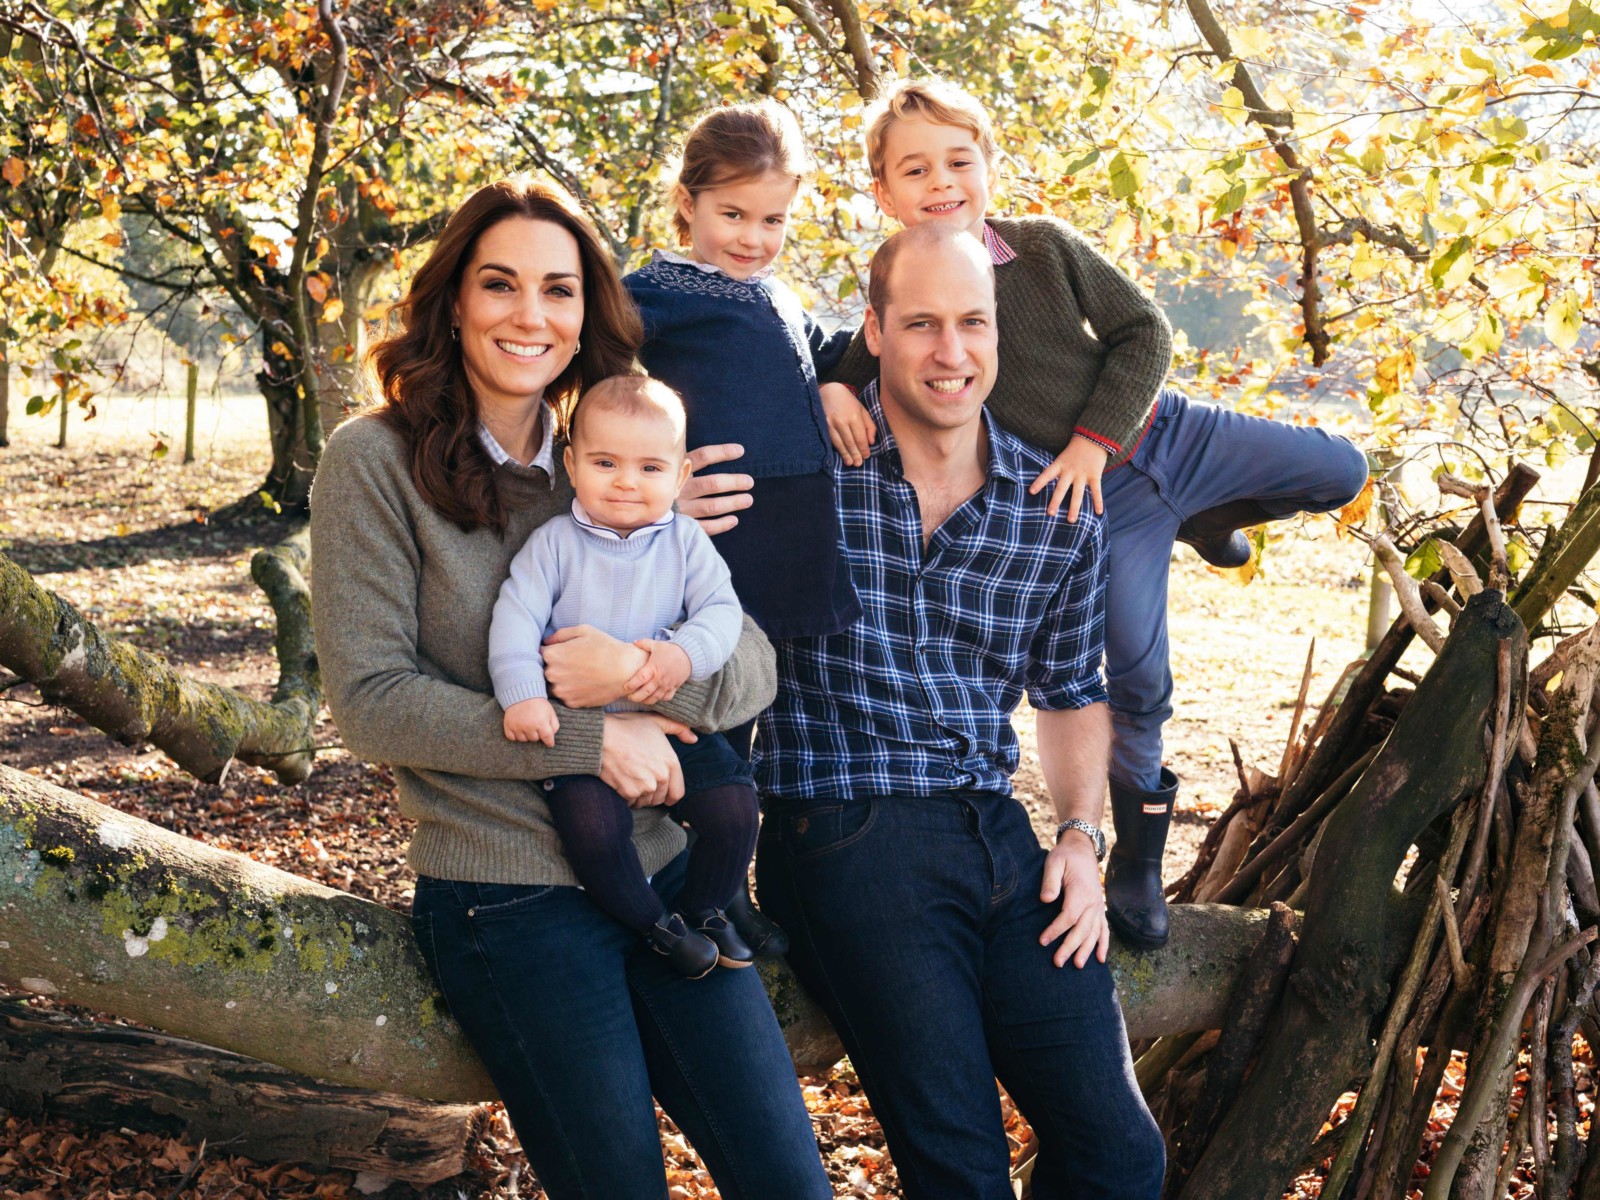 The Duchess of Cambridge says she looks back on her own childhood for inspiration when caring for her young family